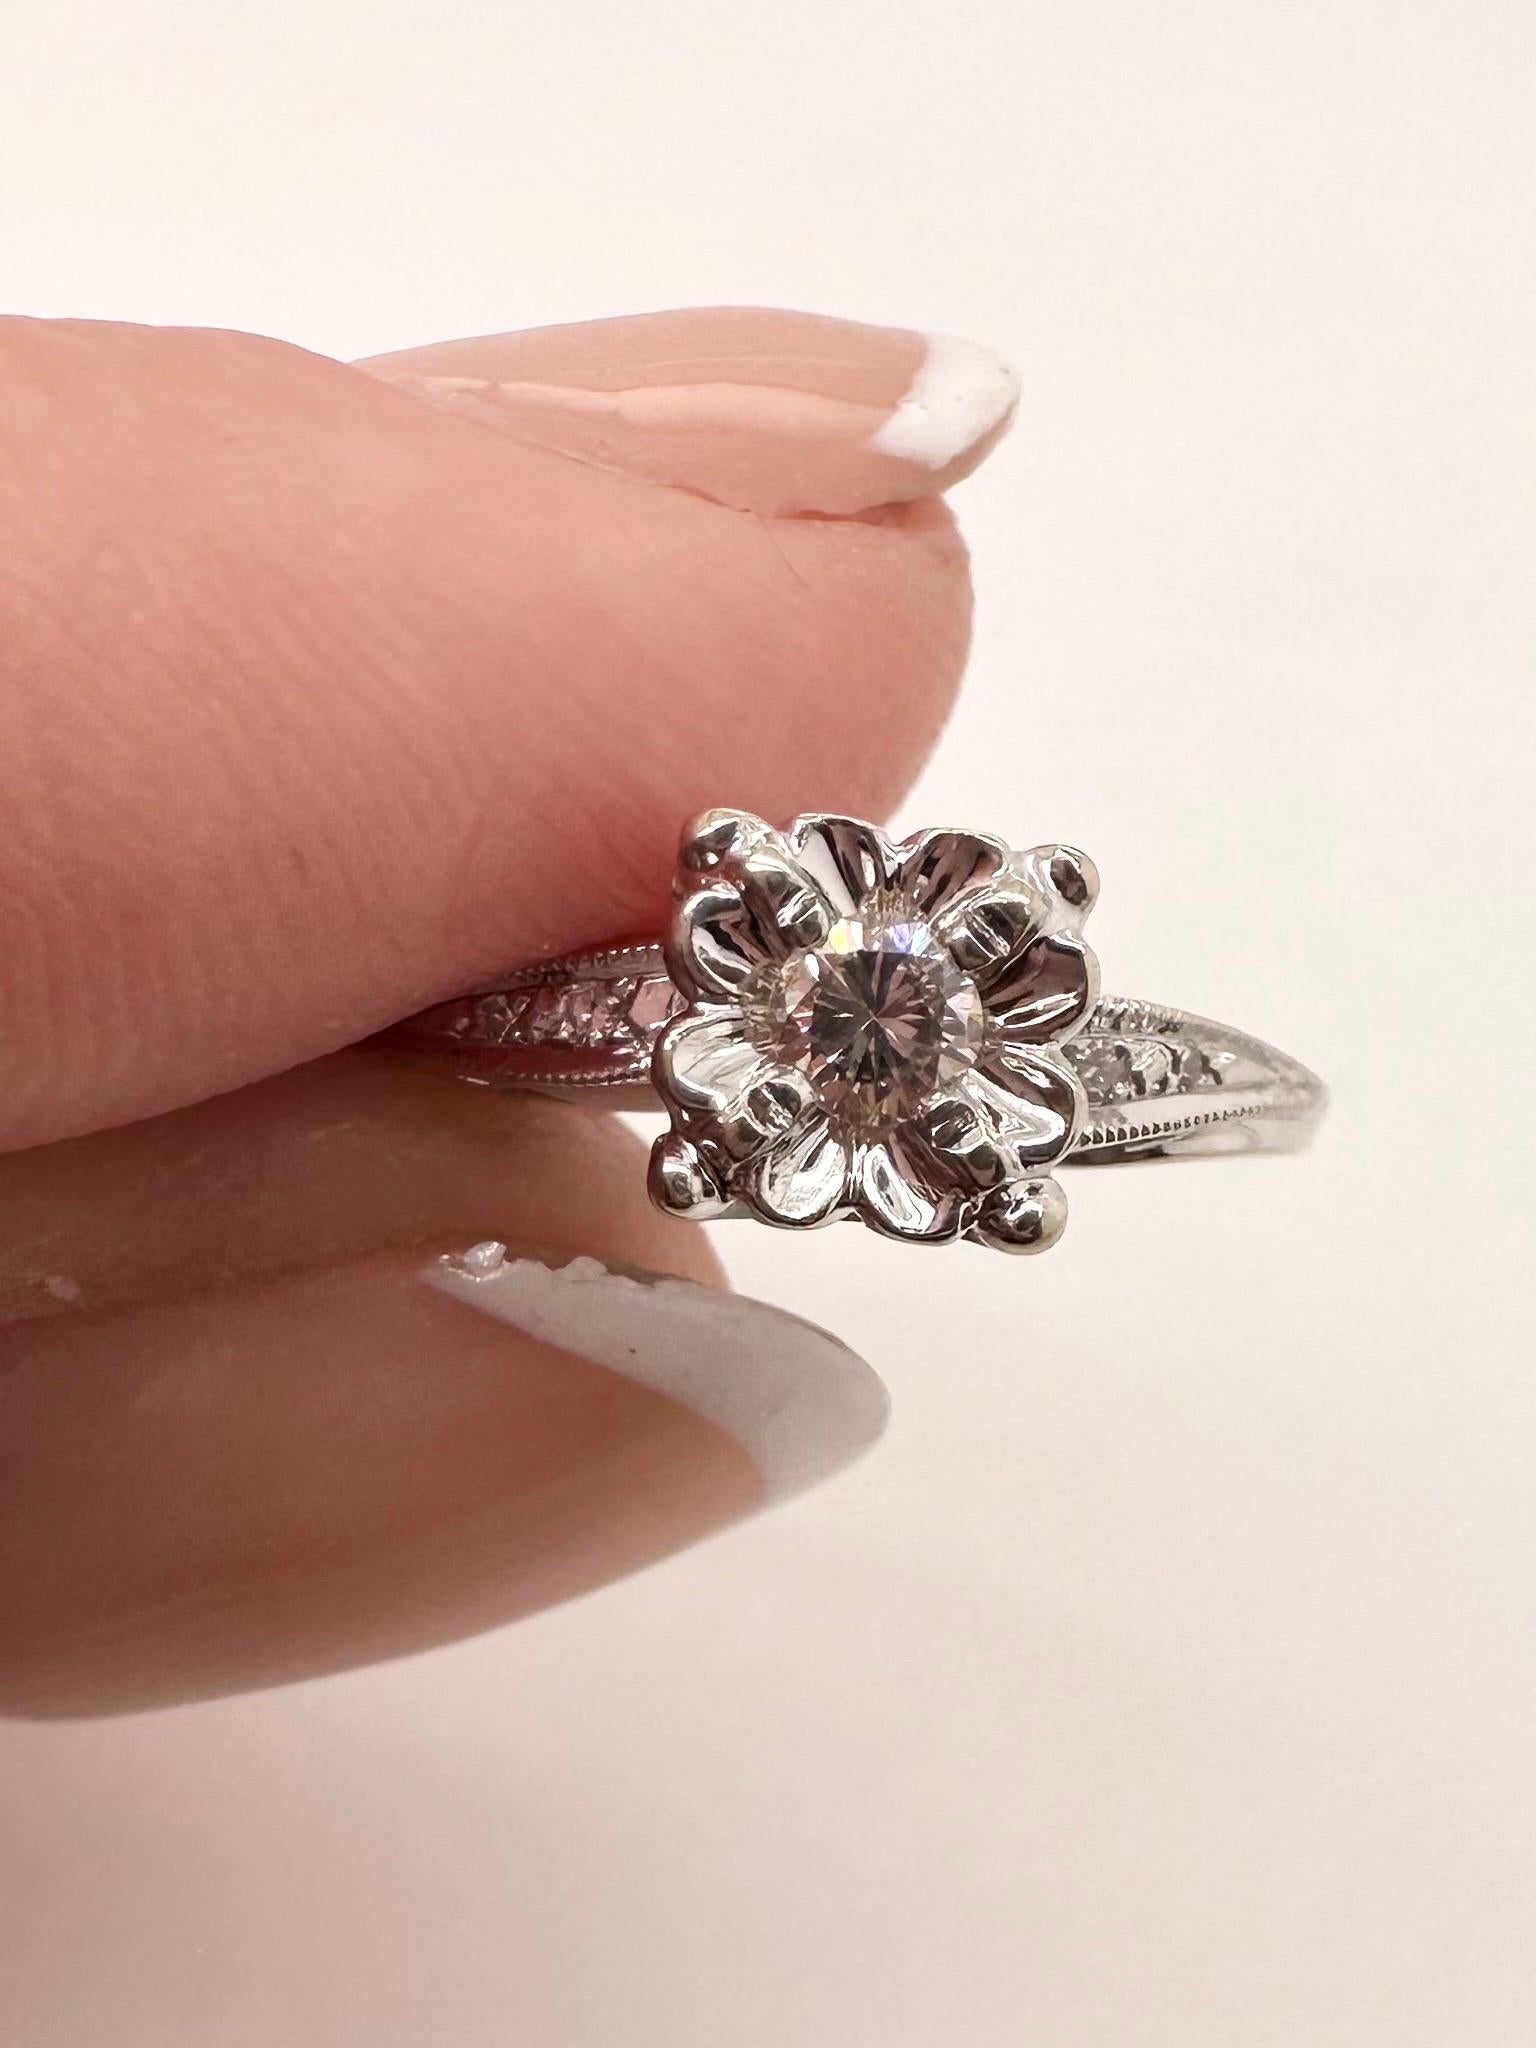 Floral platinum diamond ring vintage diamond ring In Excellent Condition For Sale In Boca Raton, FL